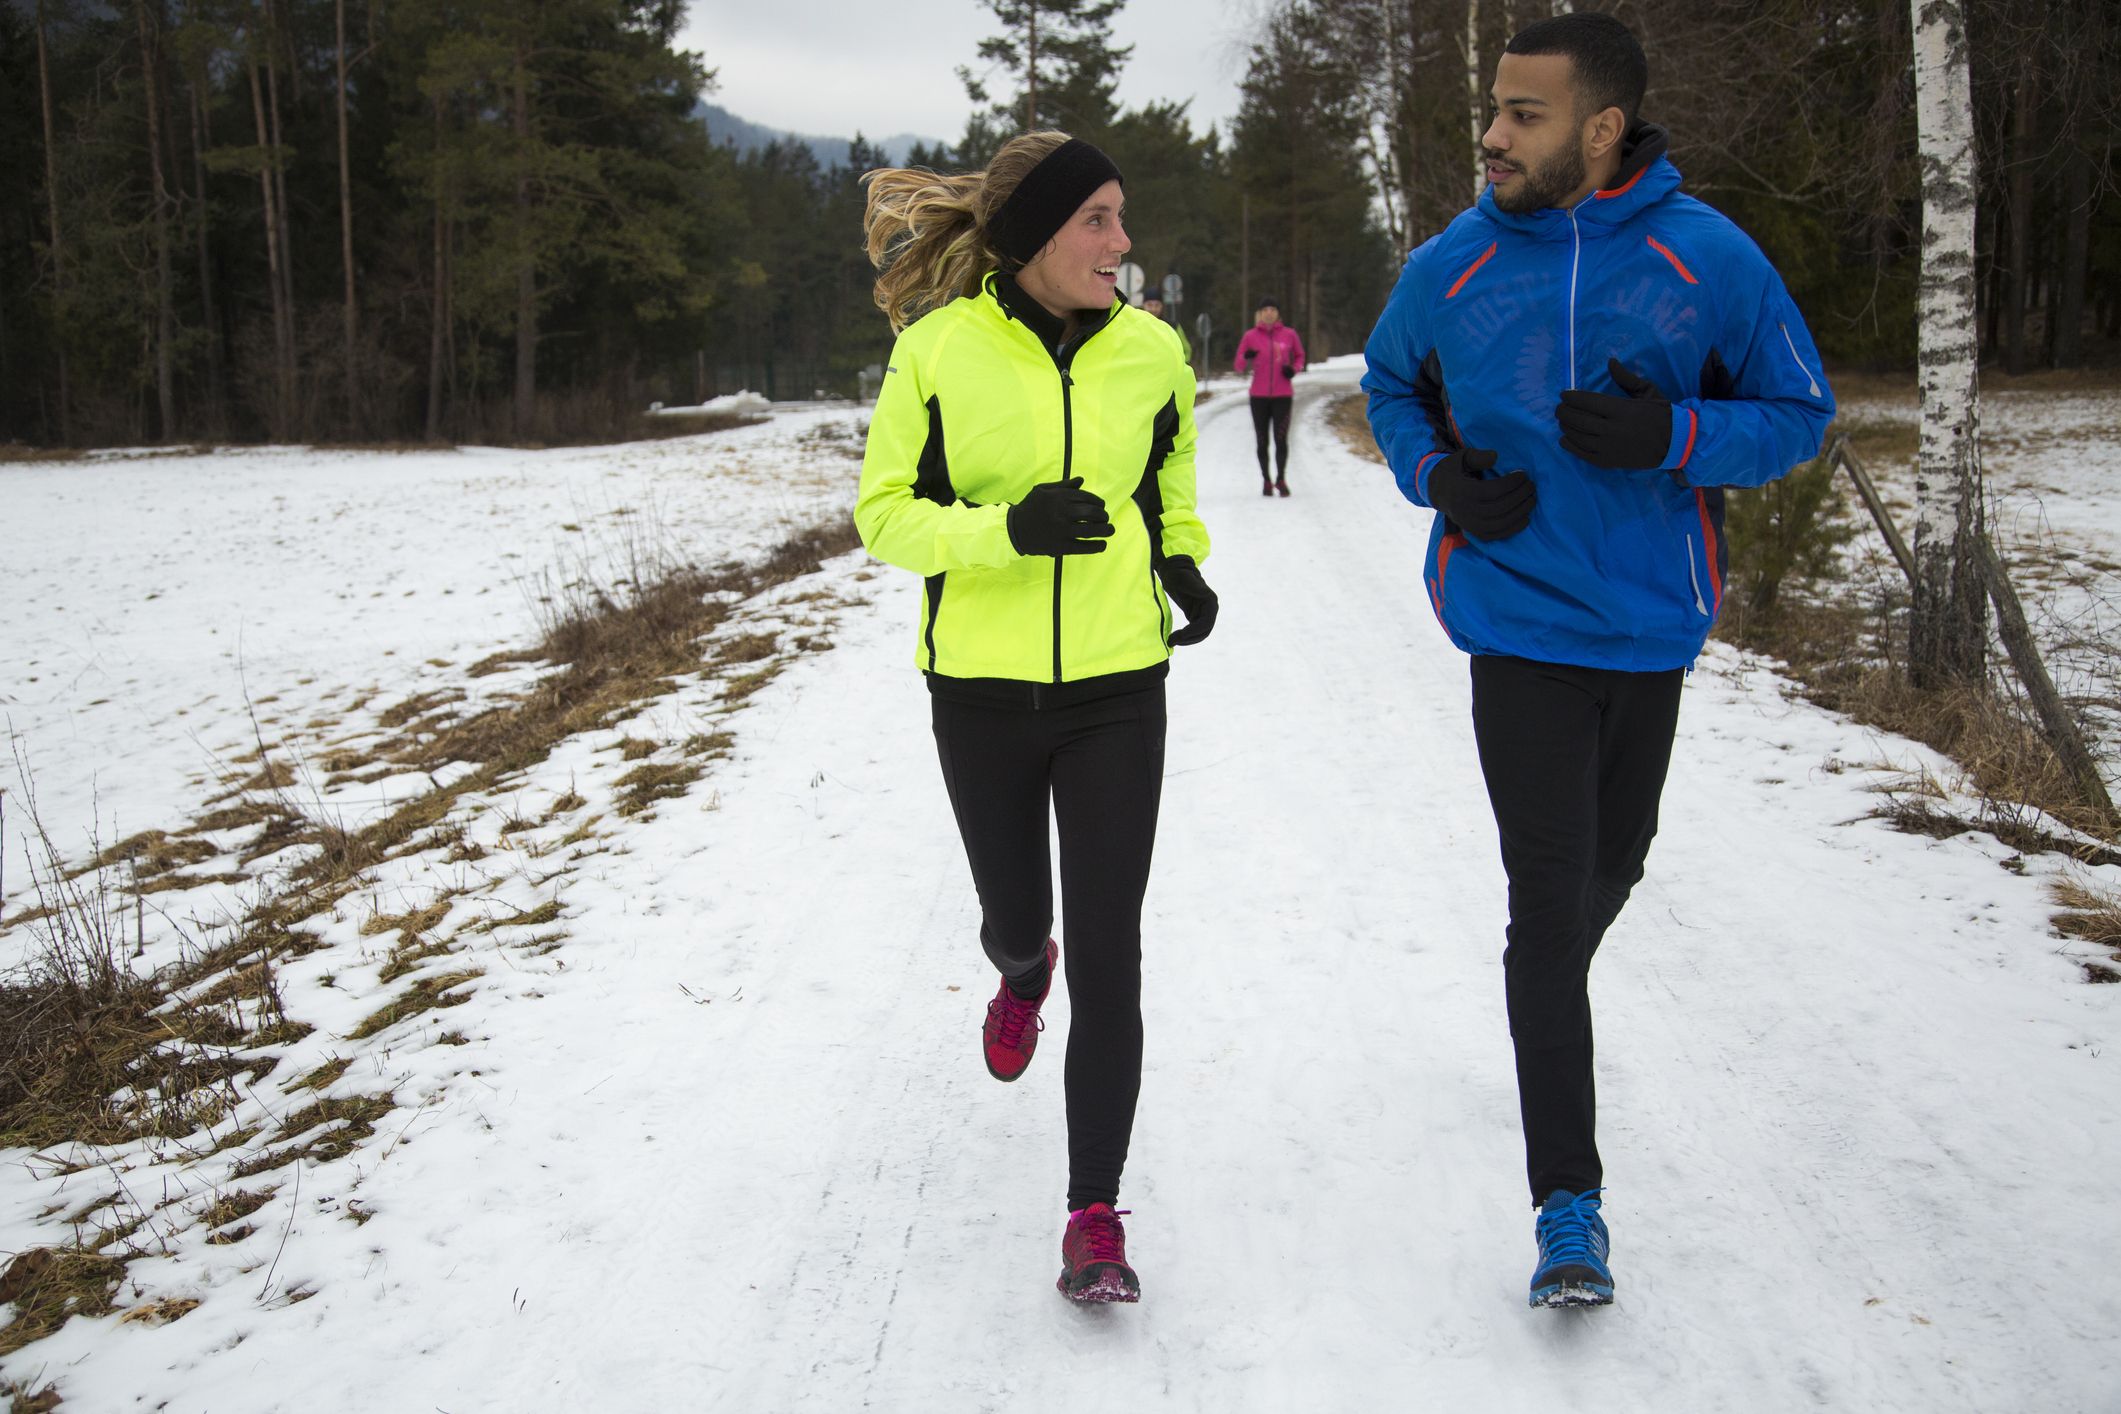 Winter Running tips: What can we do to make running in winter less